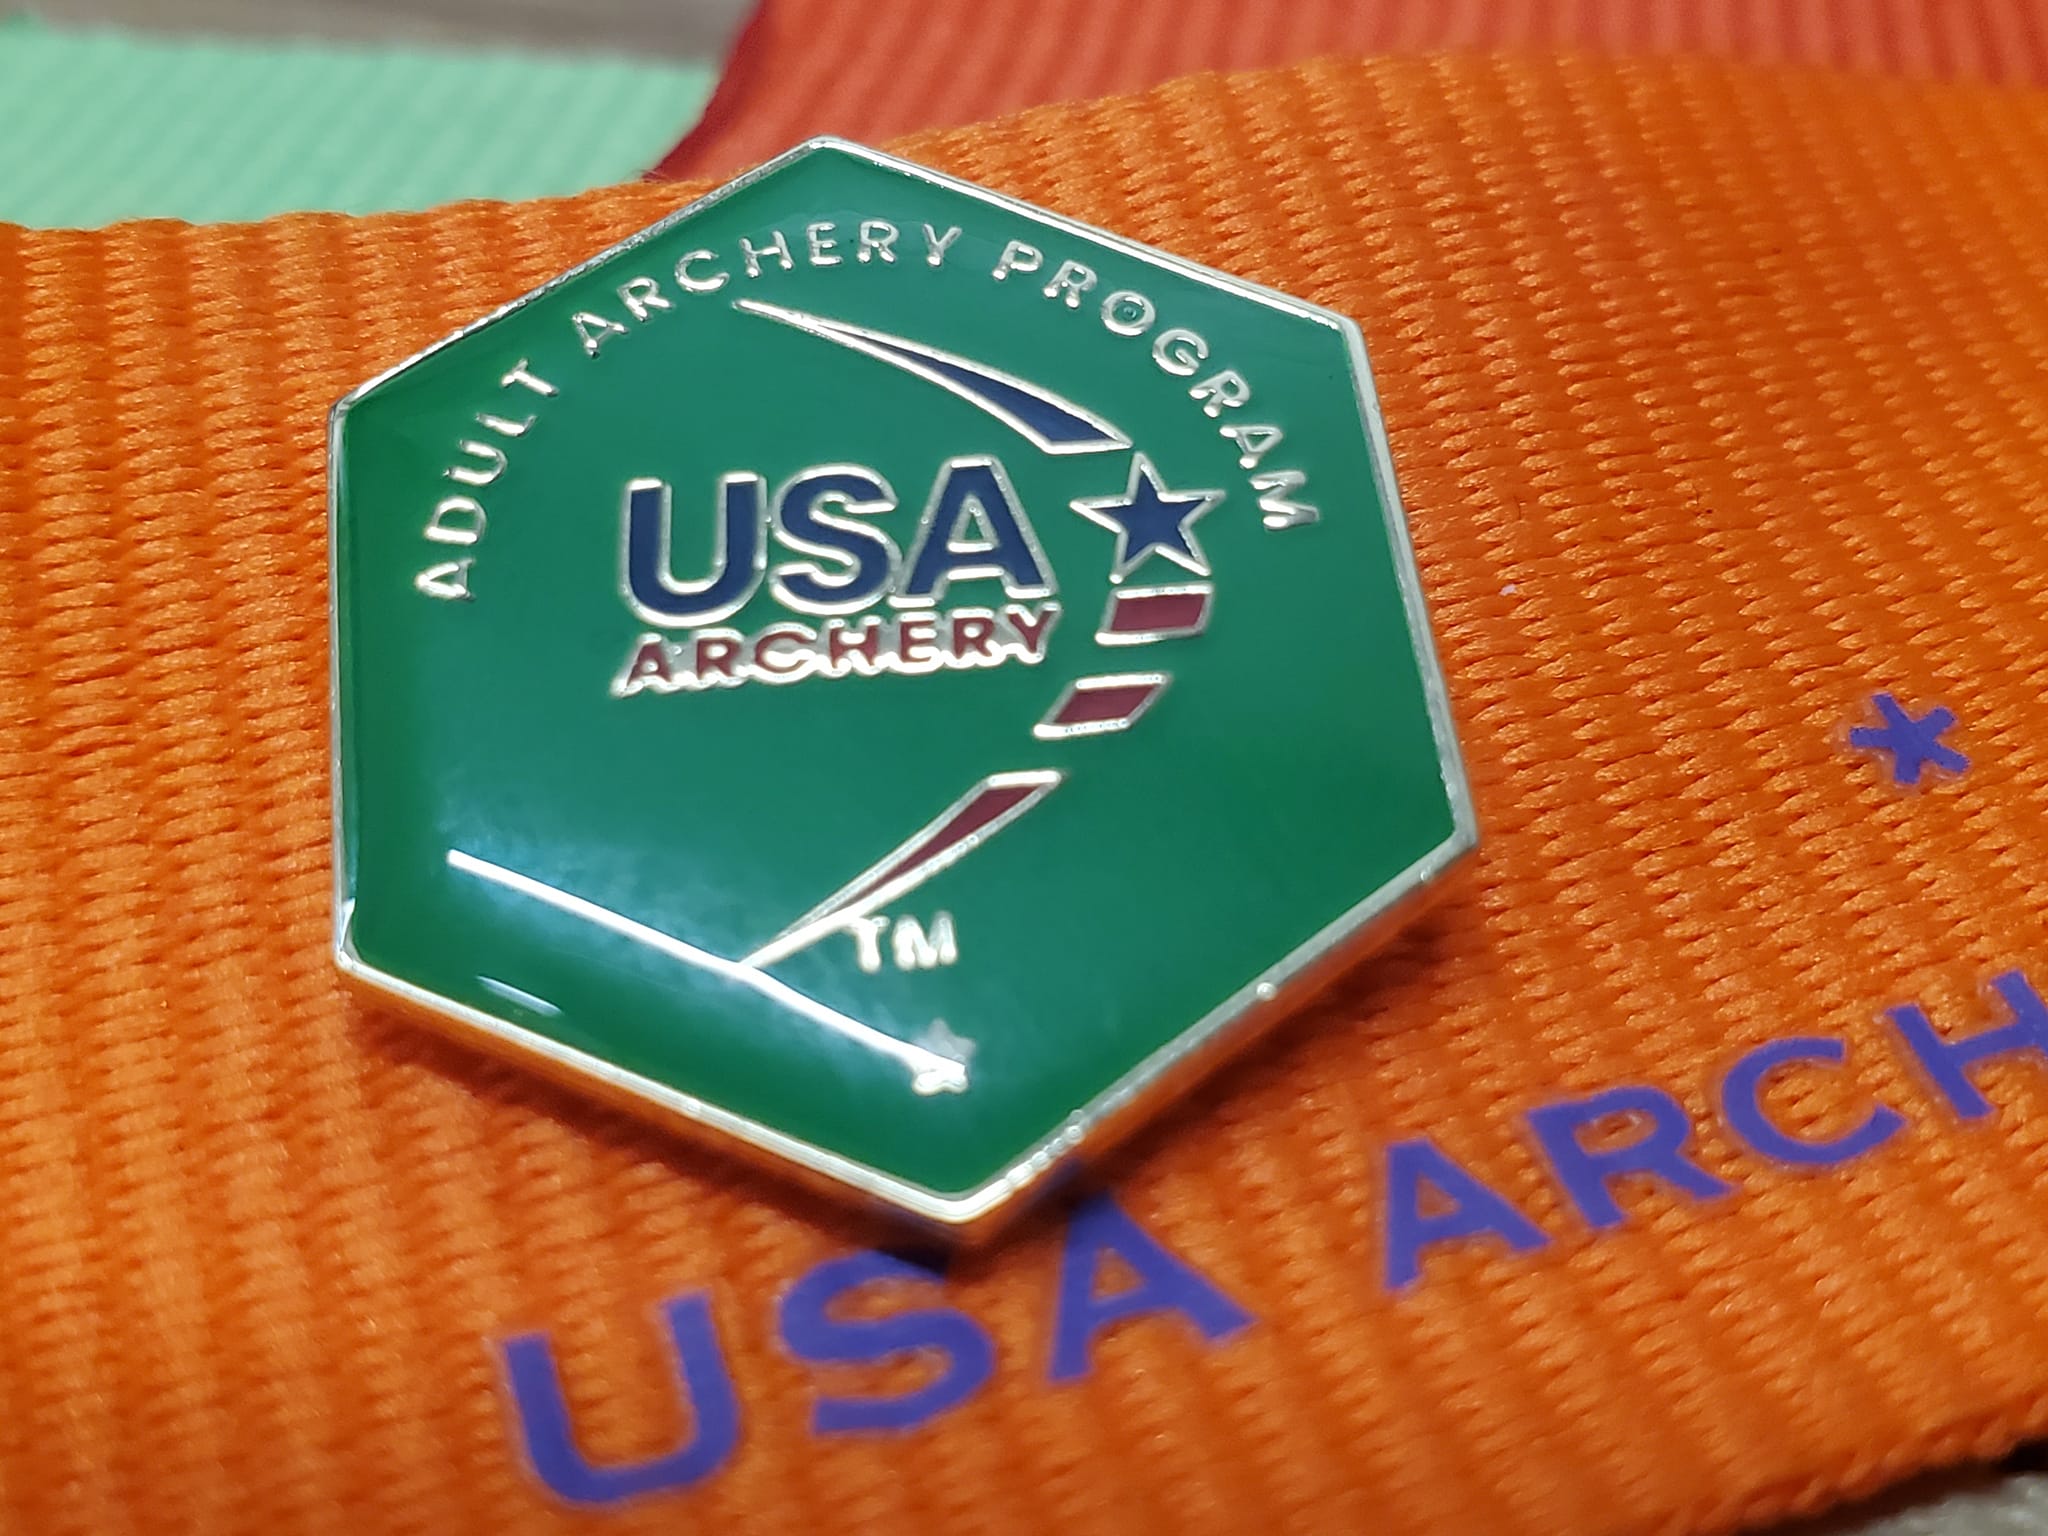 USA Archery Pin at The Quiver Archery Range in Bentonville, AR